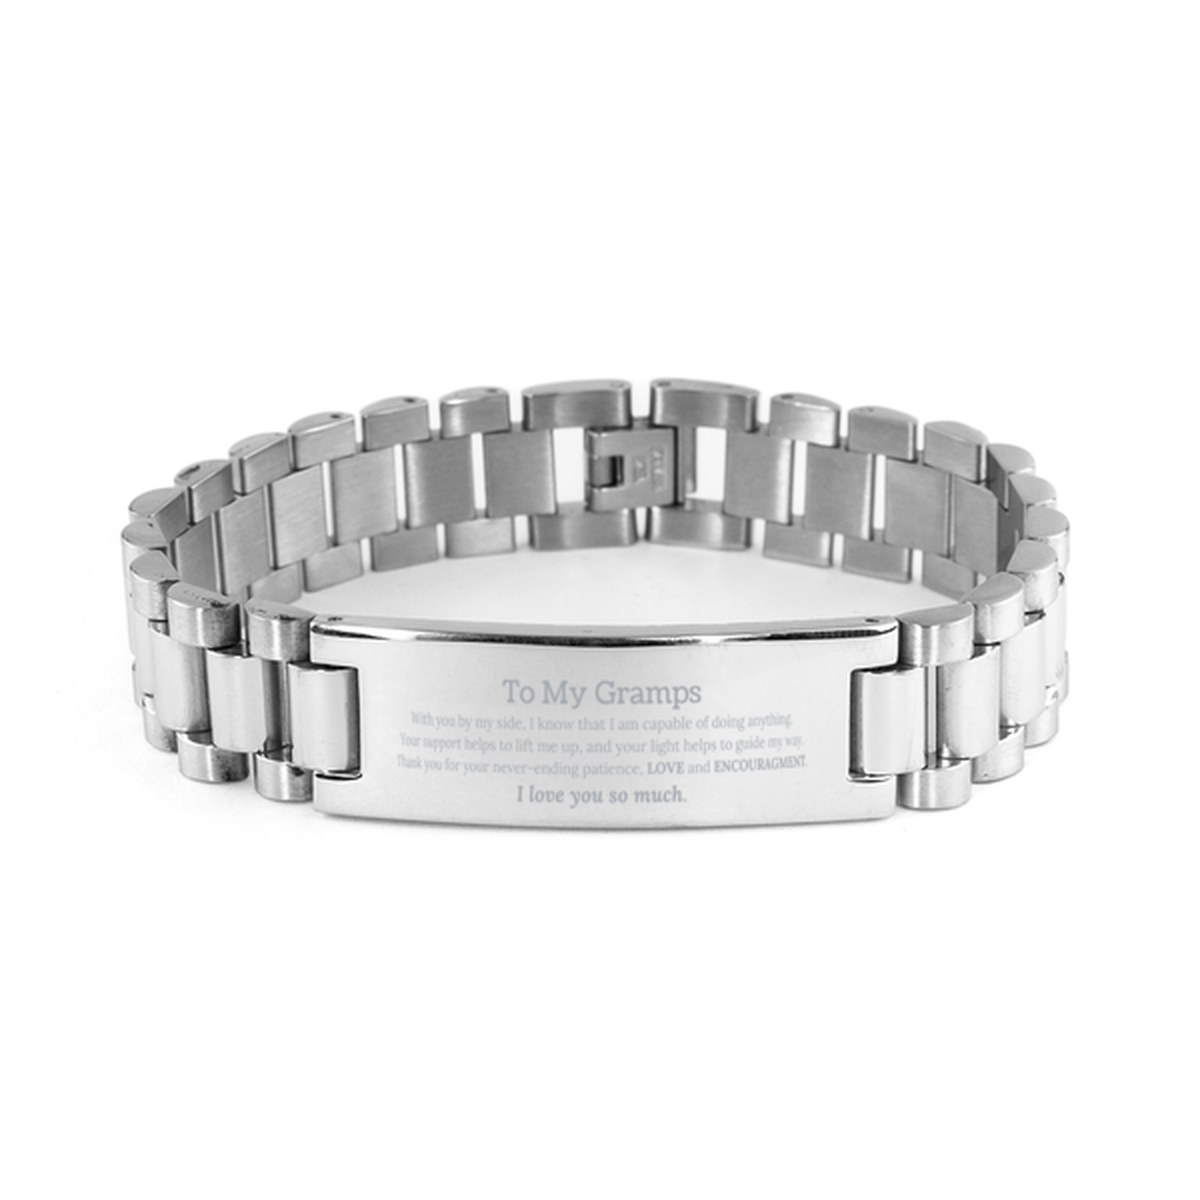 Appreciation Gramps Ladder Stainless Steel Bracelet Gifts, To My Gramps Birthday Christmas Wedding Keepsake Gifts for Gramps With you by my side, I know that I am capable of doing anything. I love you so much